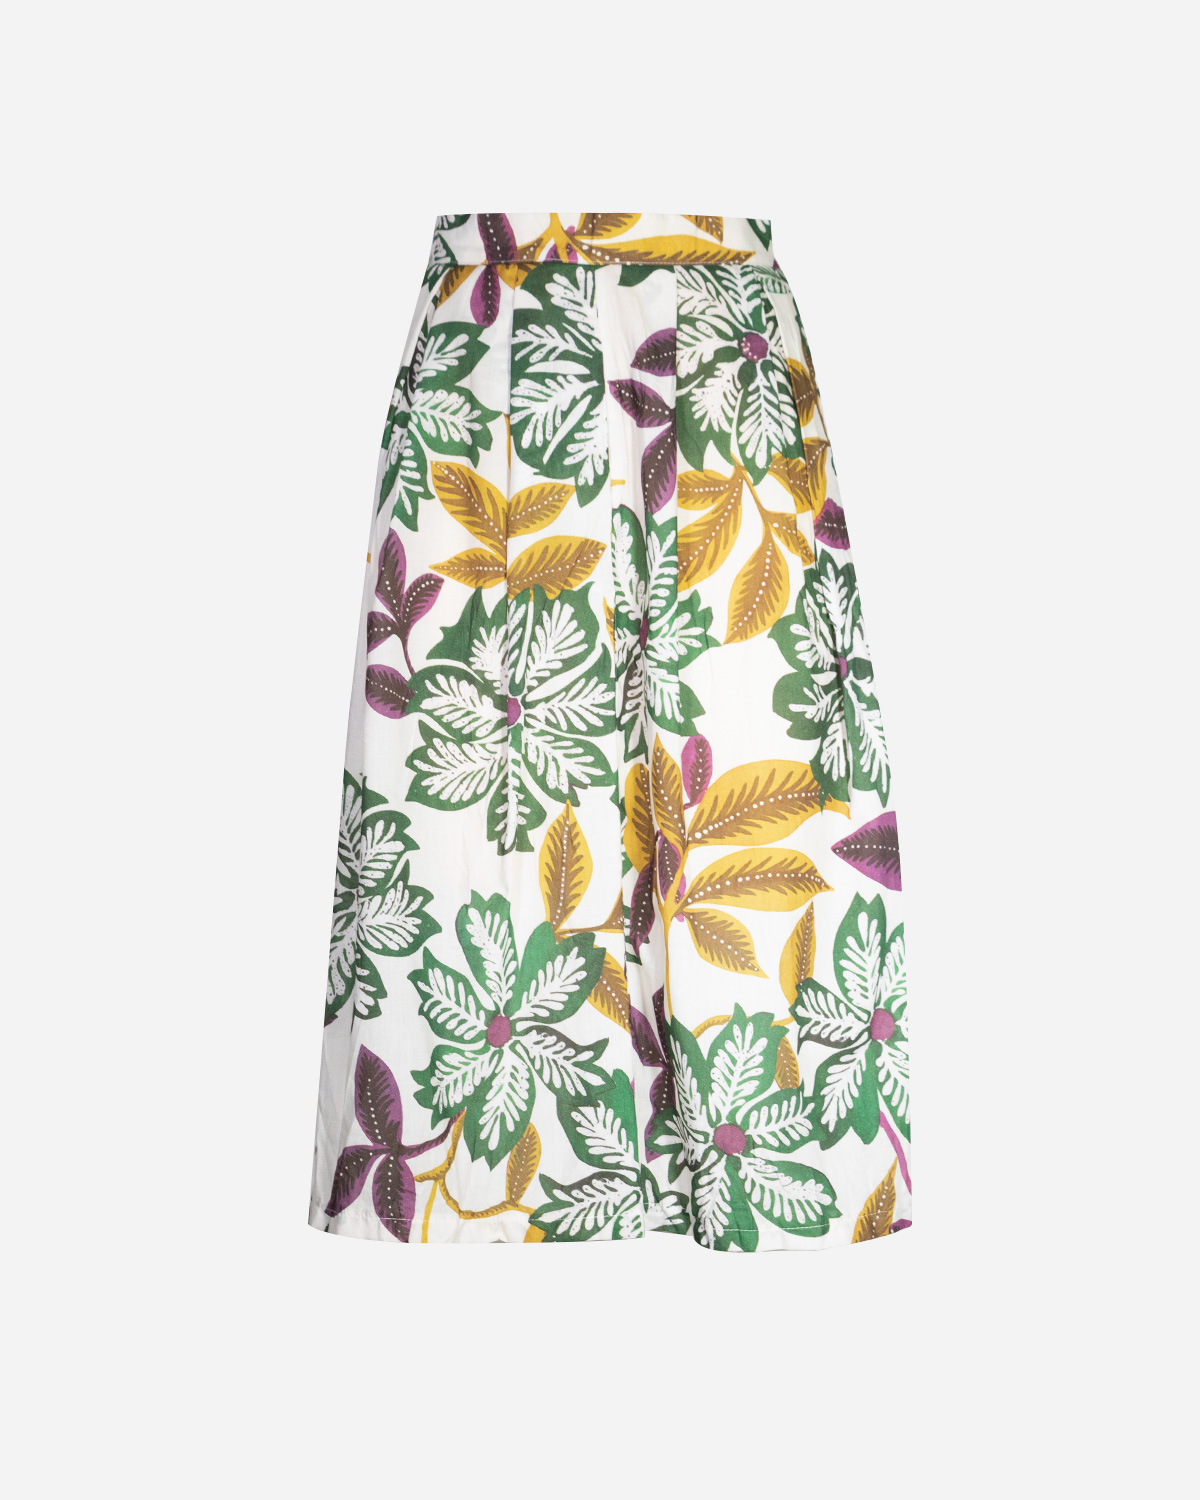 Summer vintage patterned skirts: 4 pieces